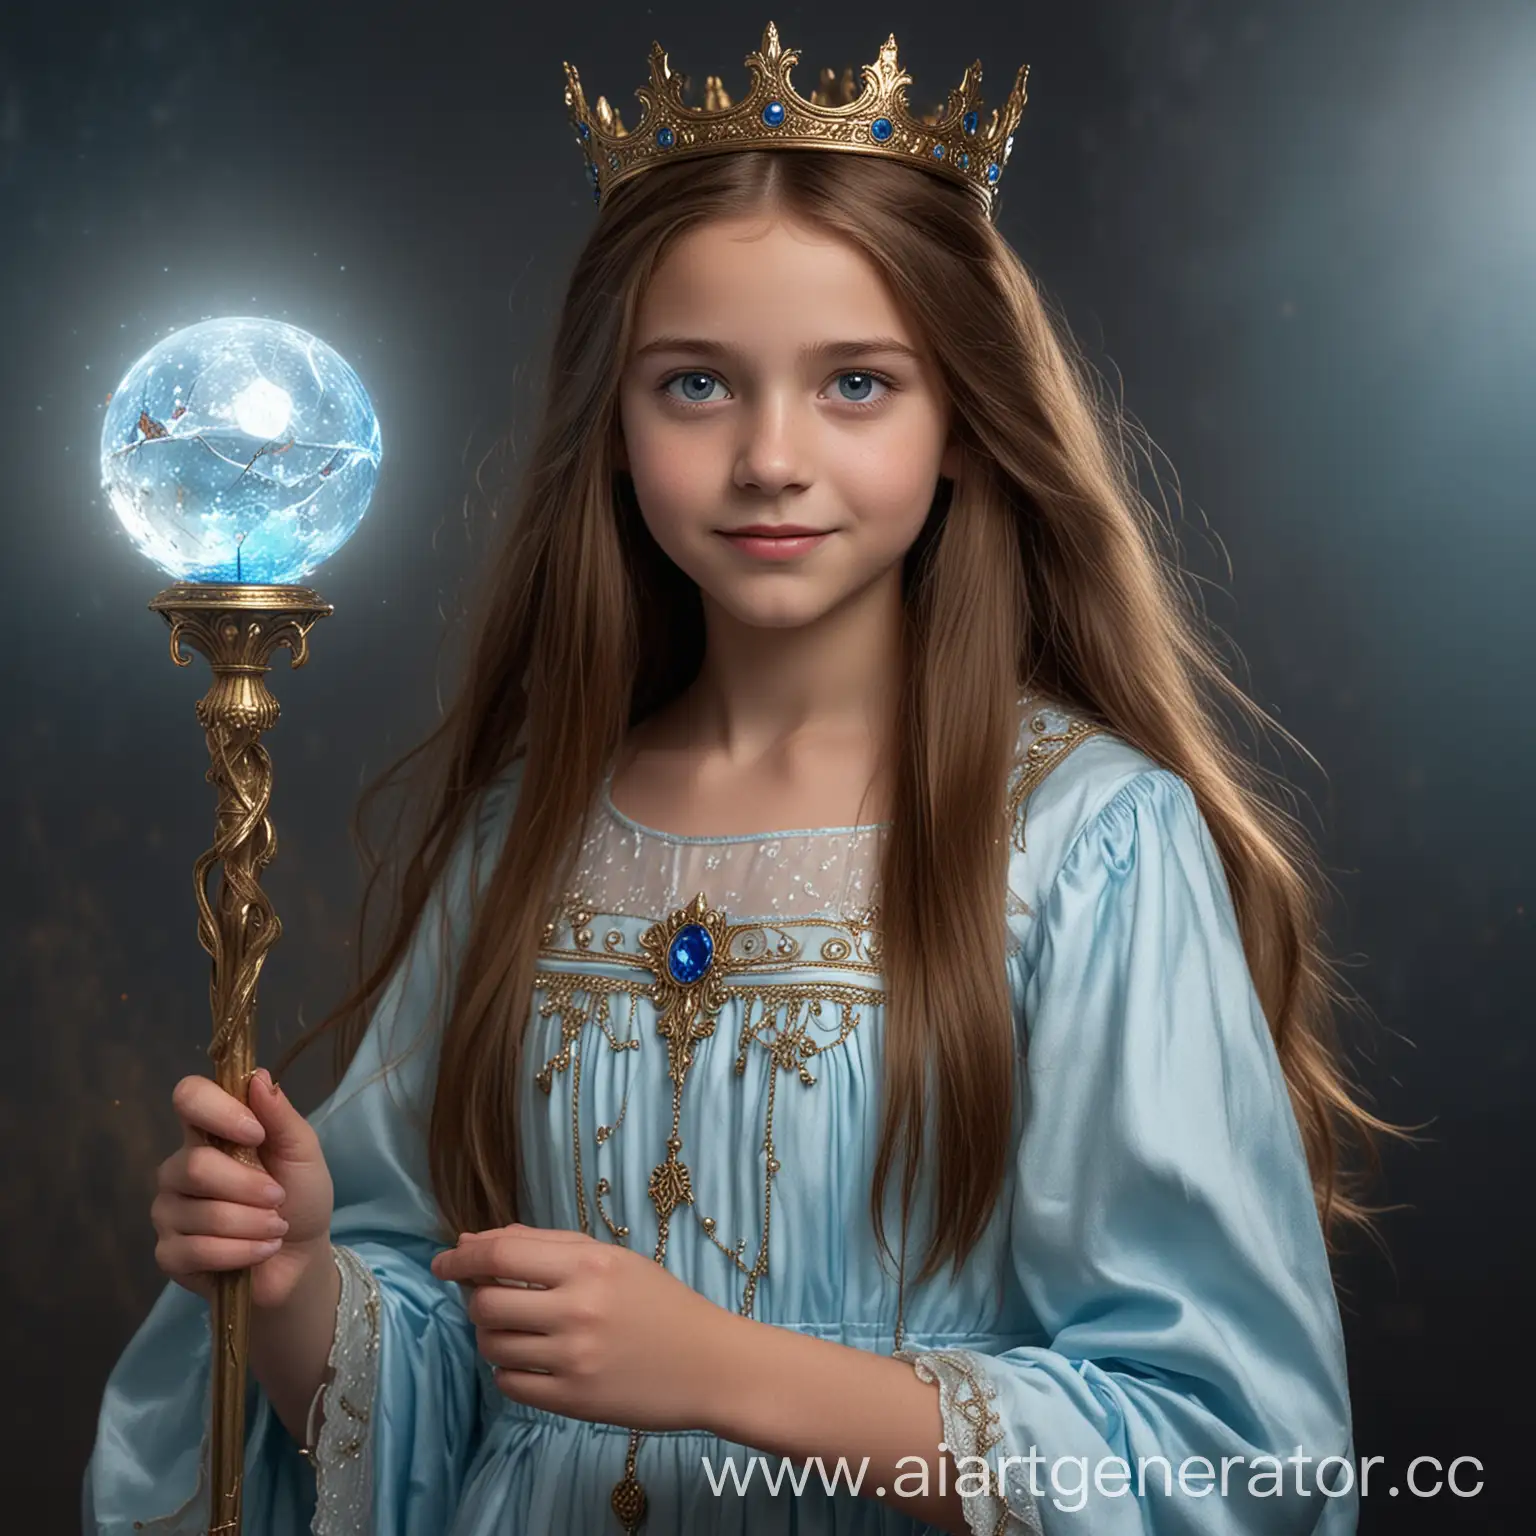 Teenage-Sorceress-with-Glowing-Blue-Eyes-and-Crystal-Crown